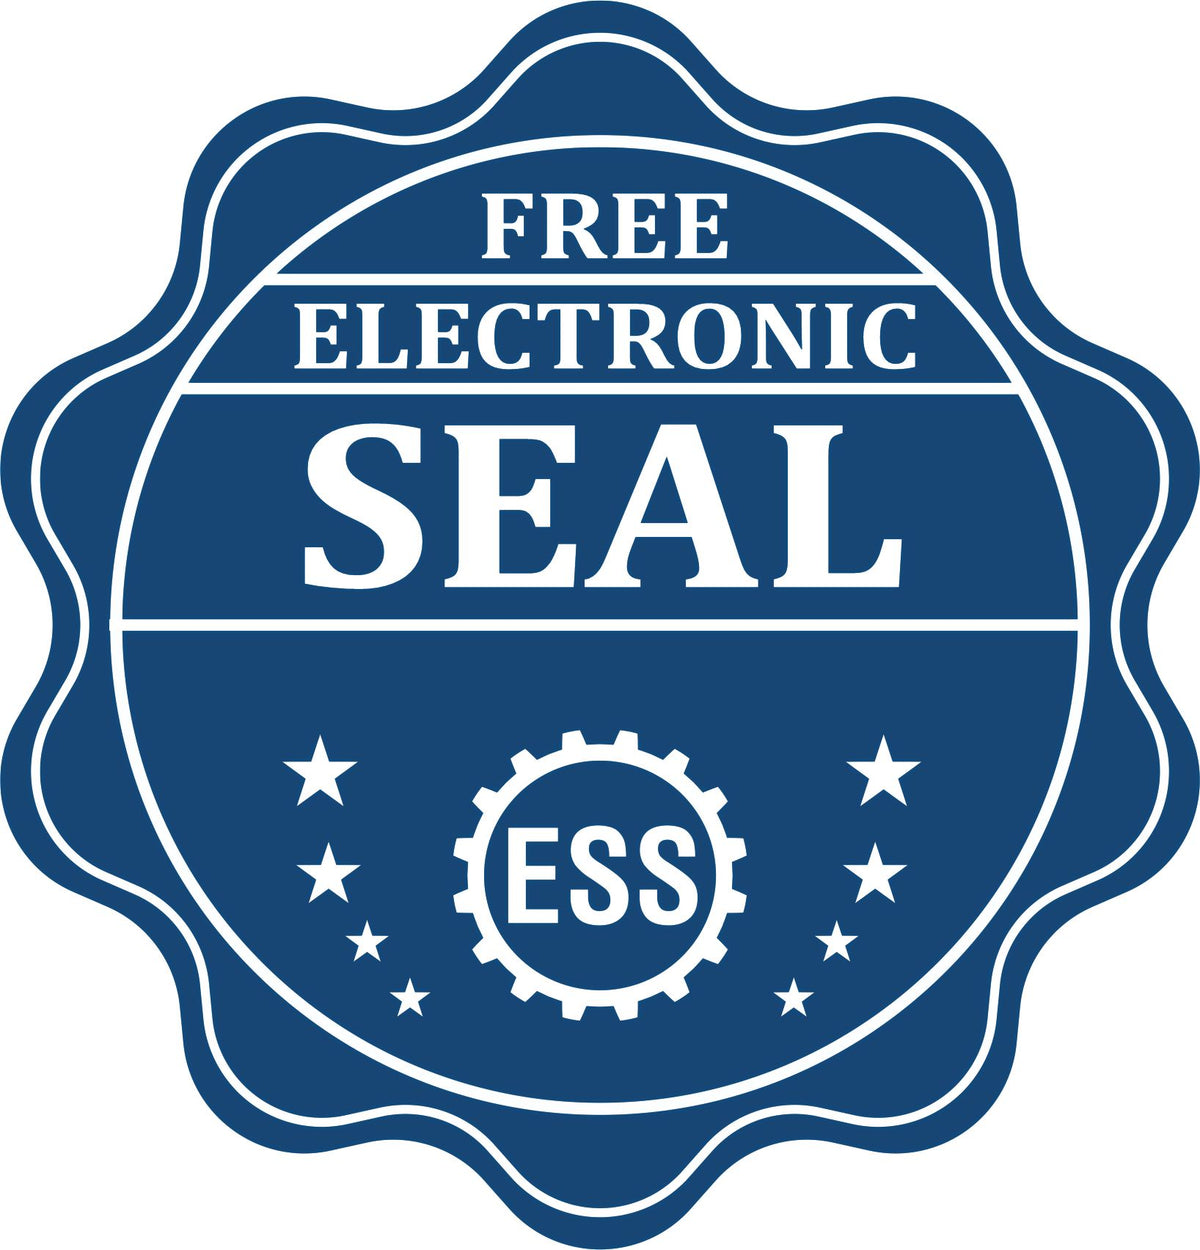 A badge showing a free electronic seal for the Gift Utah Geologist Seal with stars and the ESS gear on the emblem.